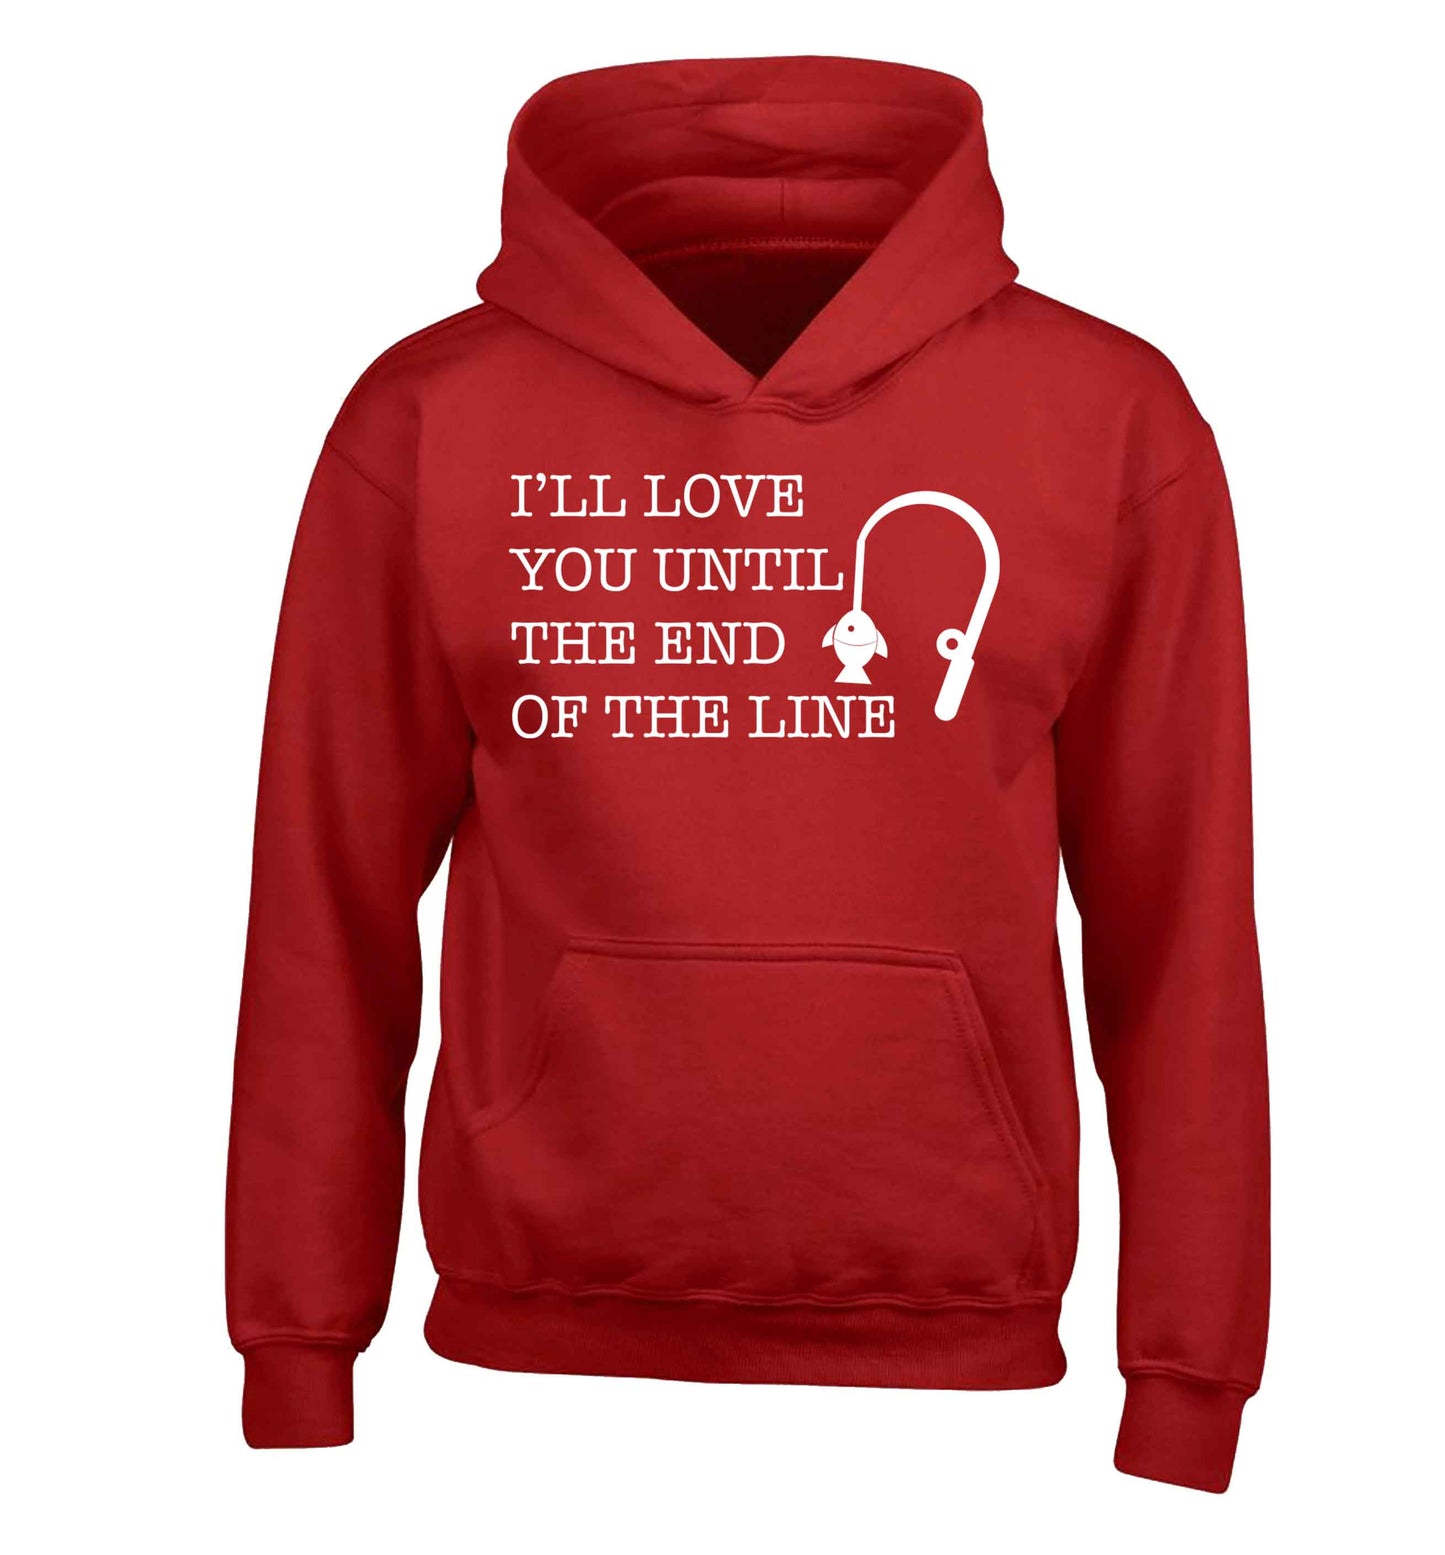 I'll love you until the end of the line children's red hoodie 12-13 Years